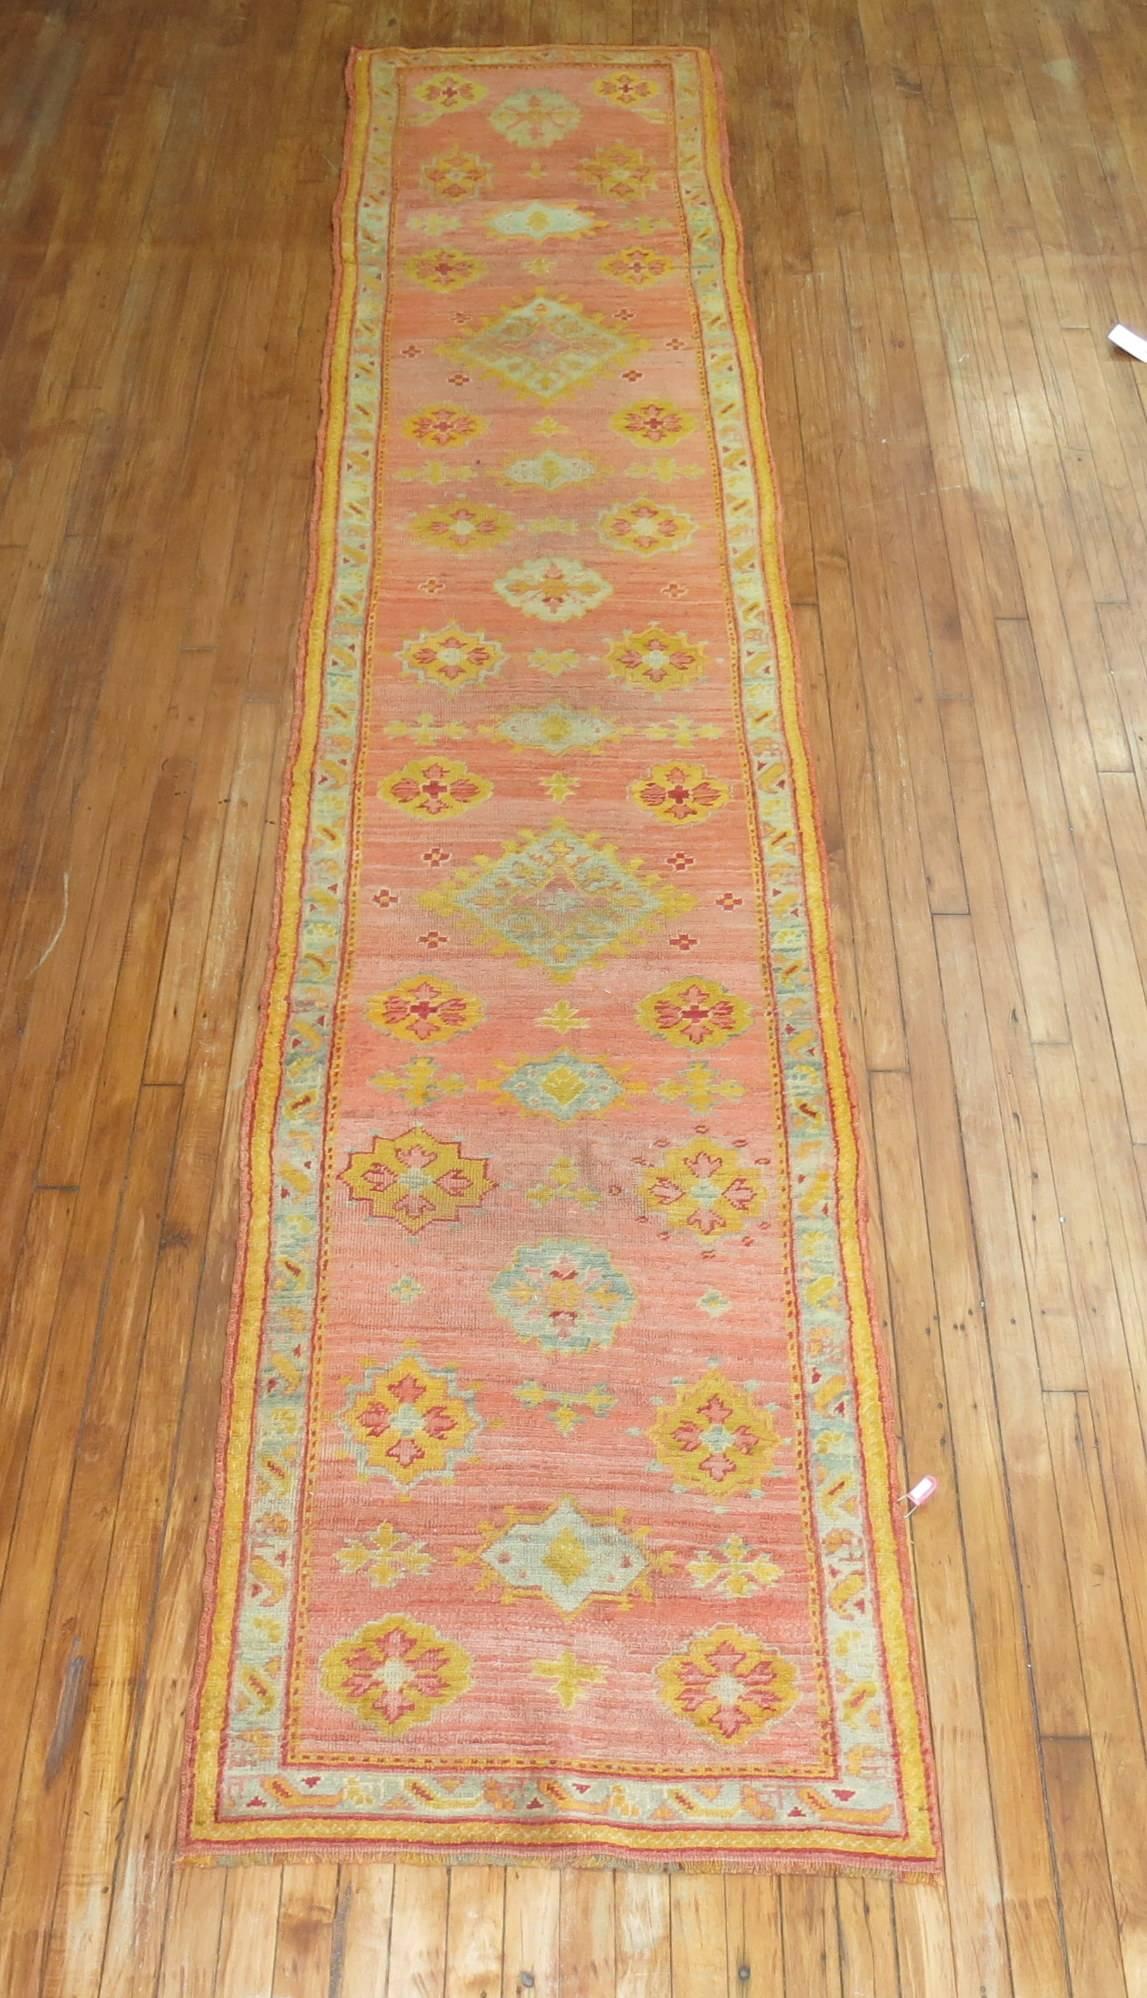 Antique Oushak runner in predominant pinks and corals.